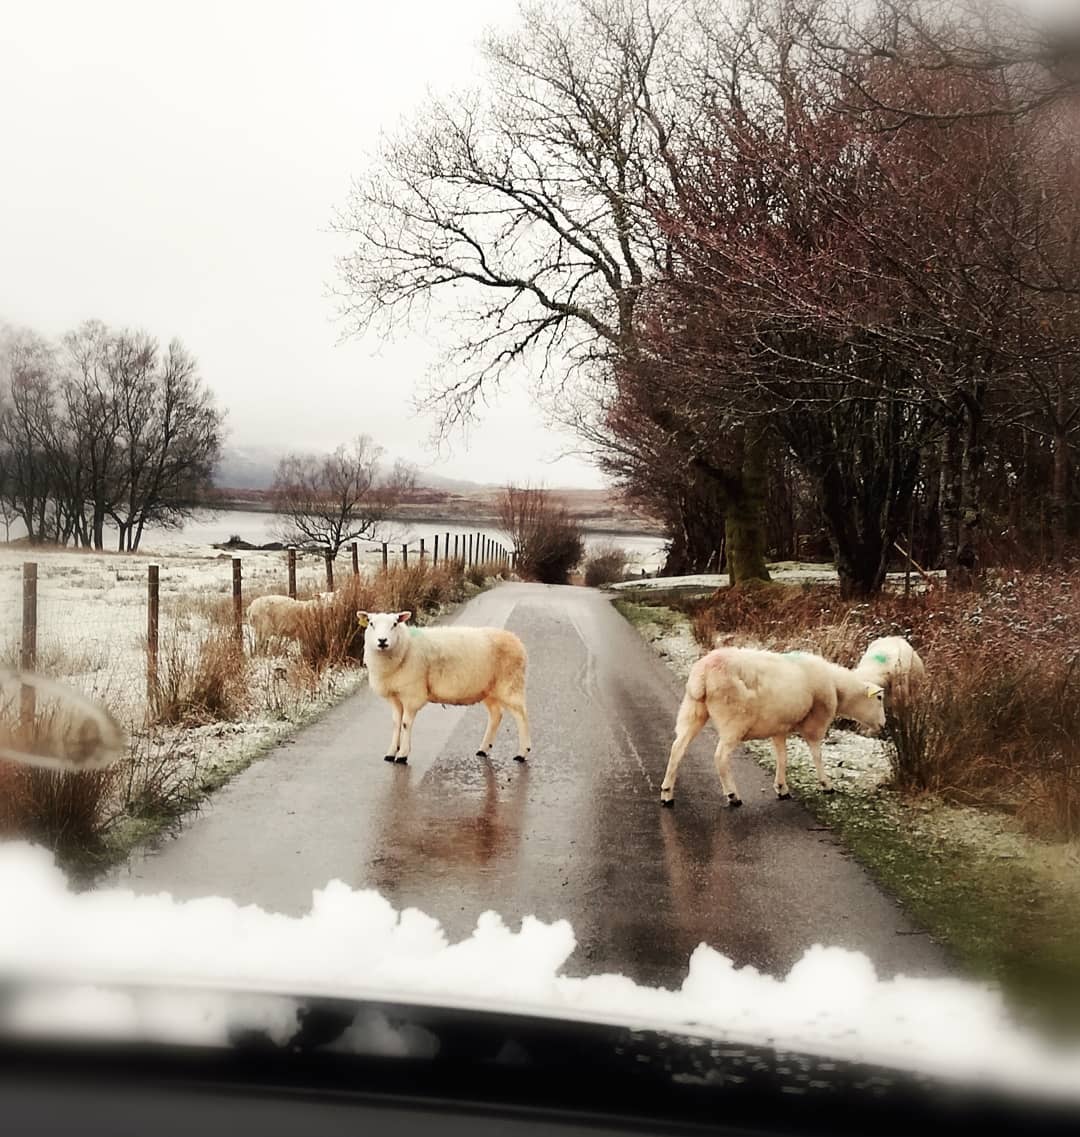 The road to Cuil Bay, always full of sheep roaming free.
.
.
#sheep #countryside #countryroads #roads #trafficjam #countrylife #highlands #scotland #cuilbay #snow